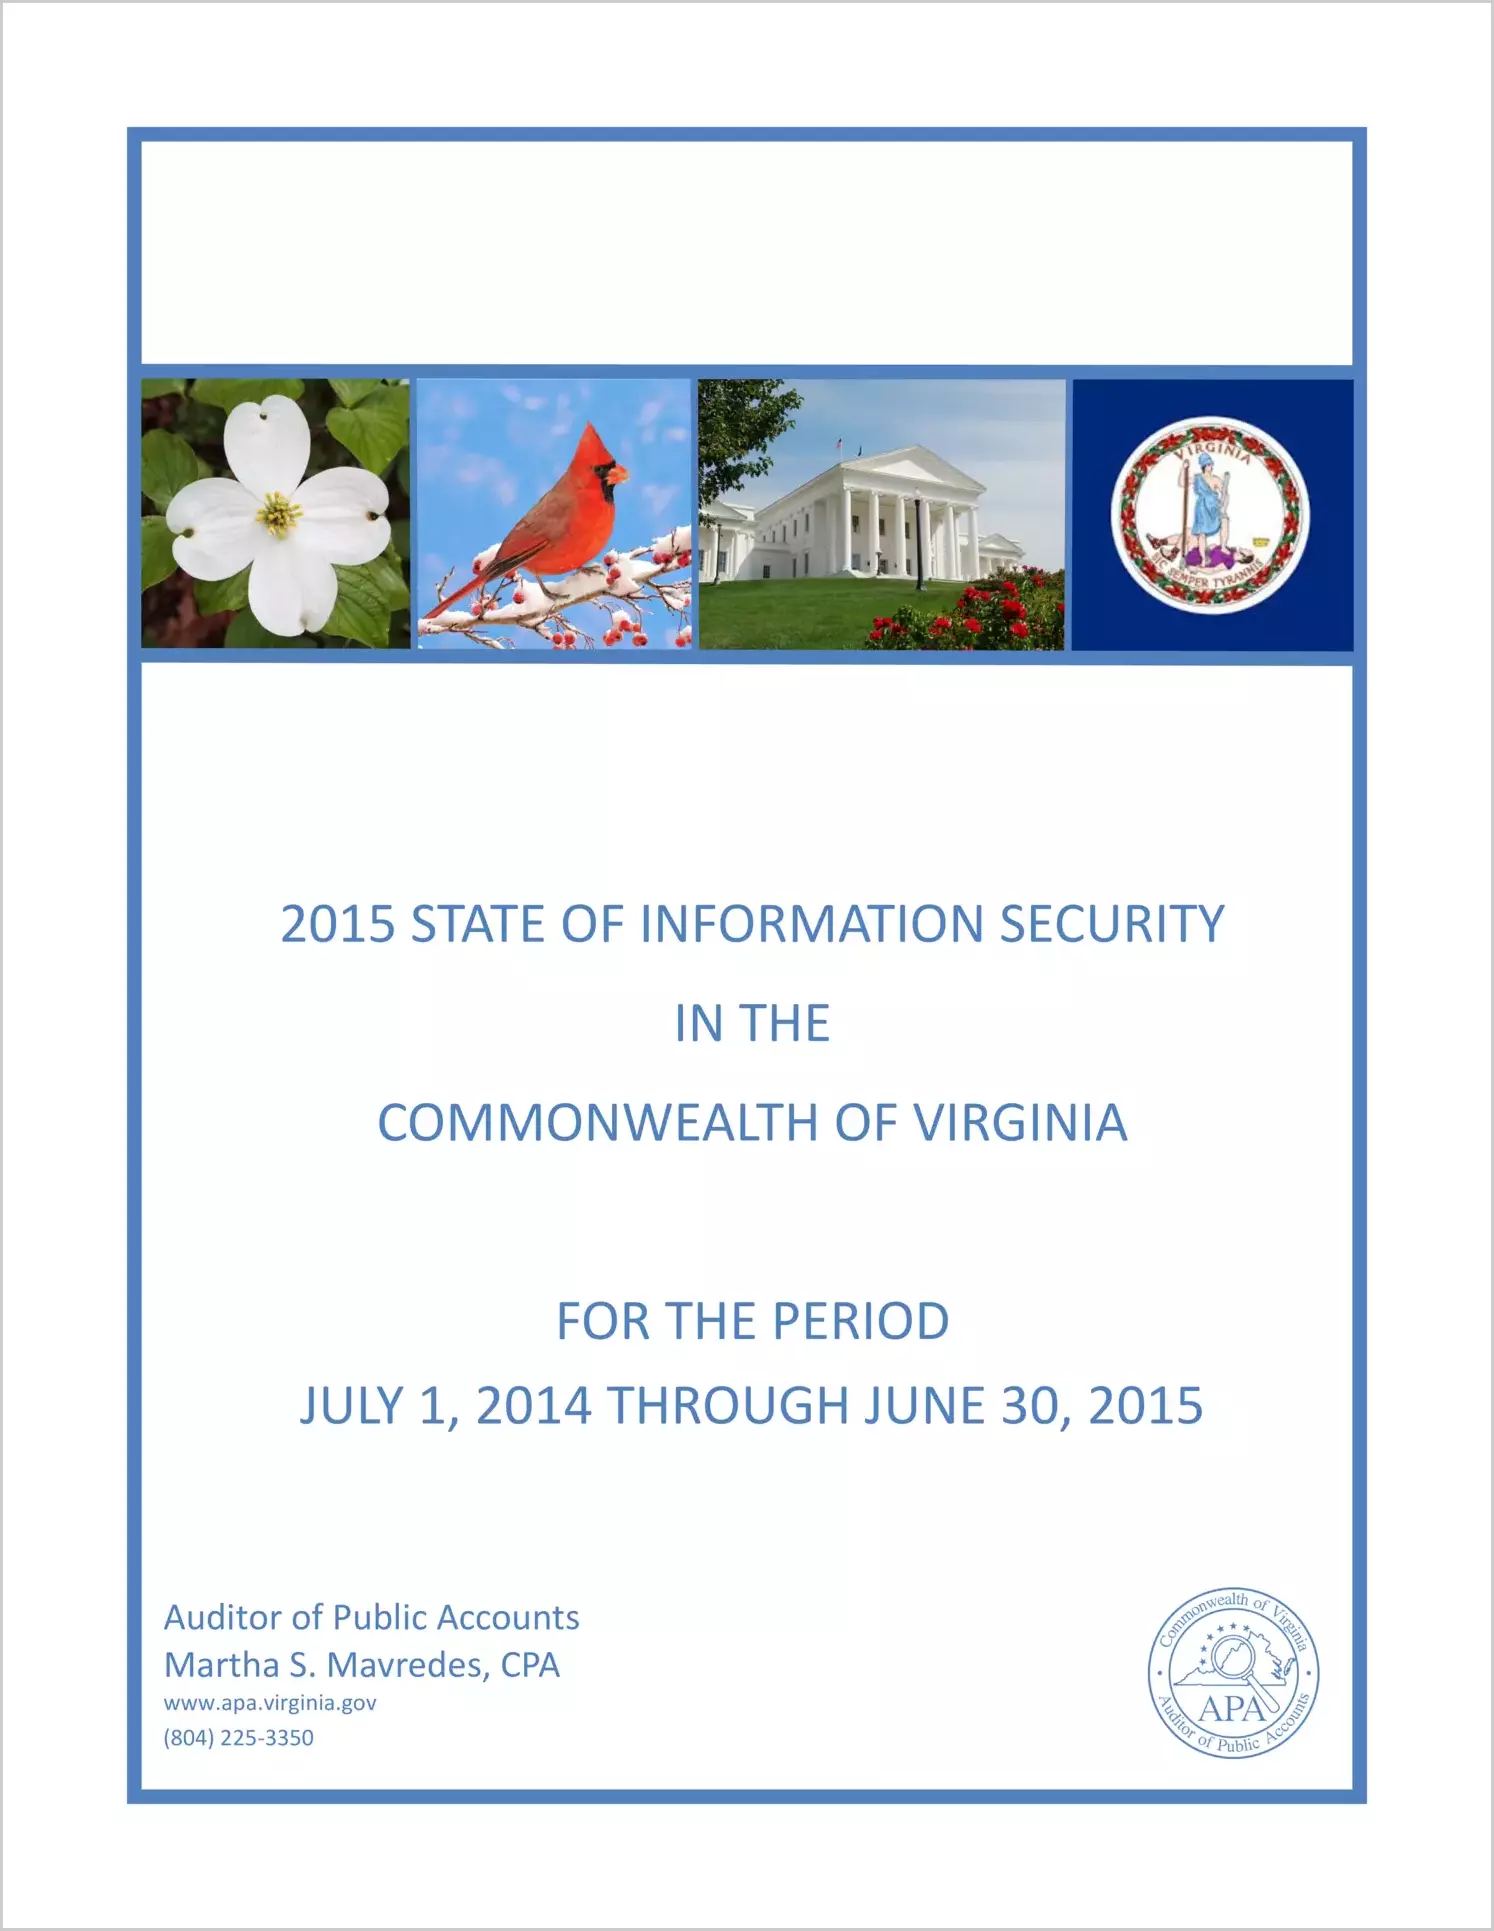 2015 State of Information Security in the Commonwealth of Virginia for the period July 1, 2014 through June 30, 2015